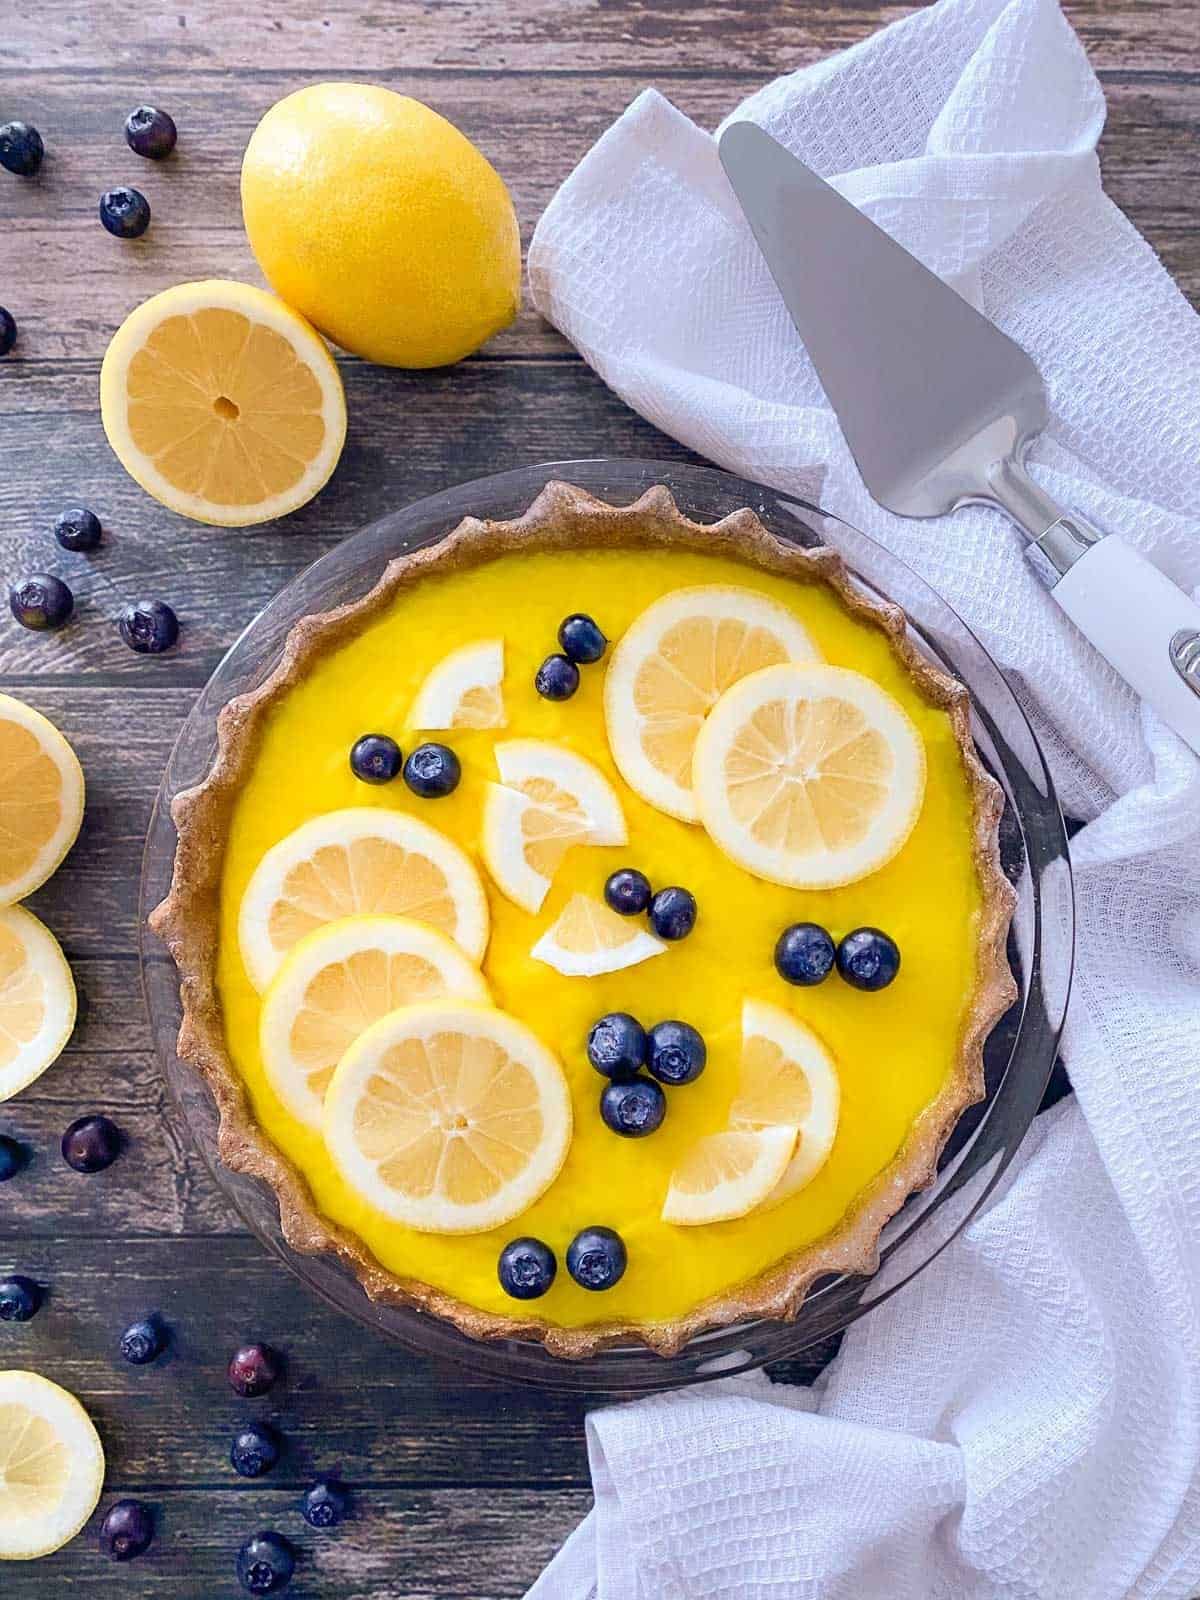 Lemon pie with lemon slices and blueberries on top in glass pie plate.